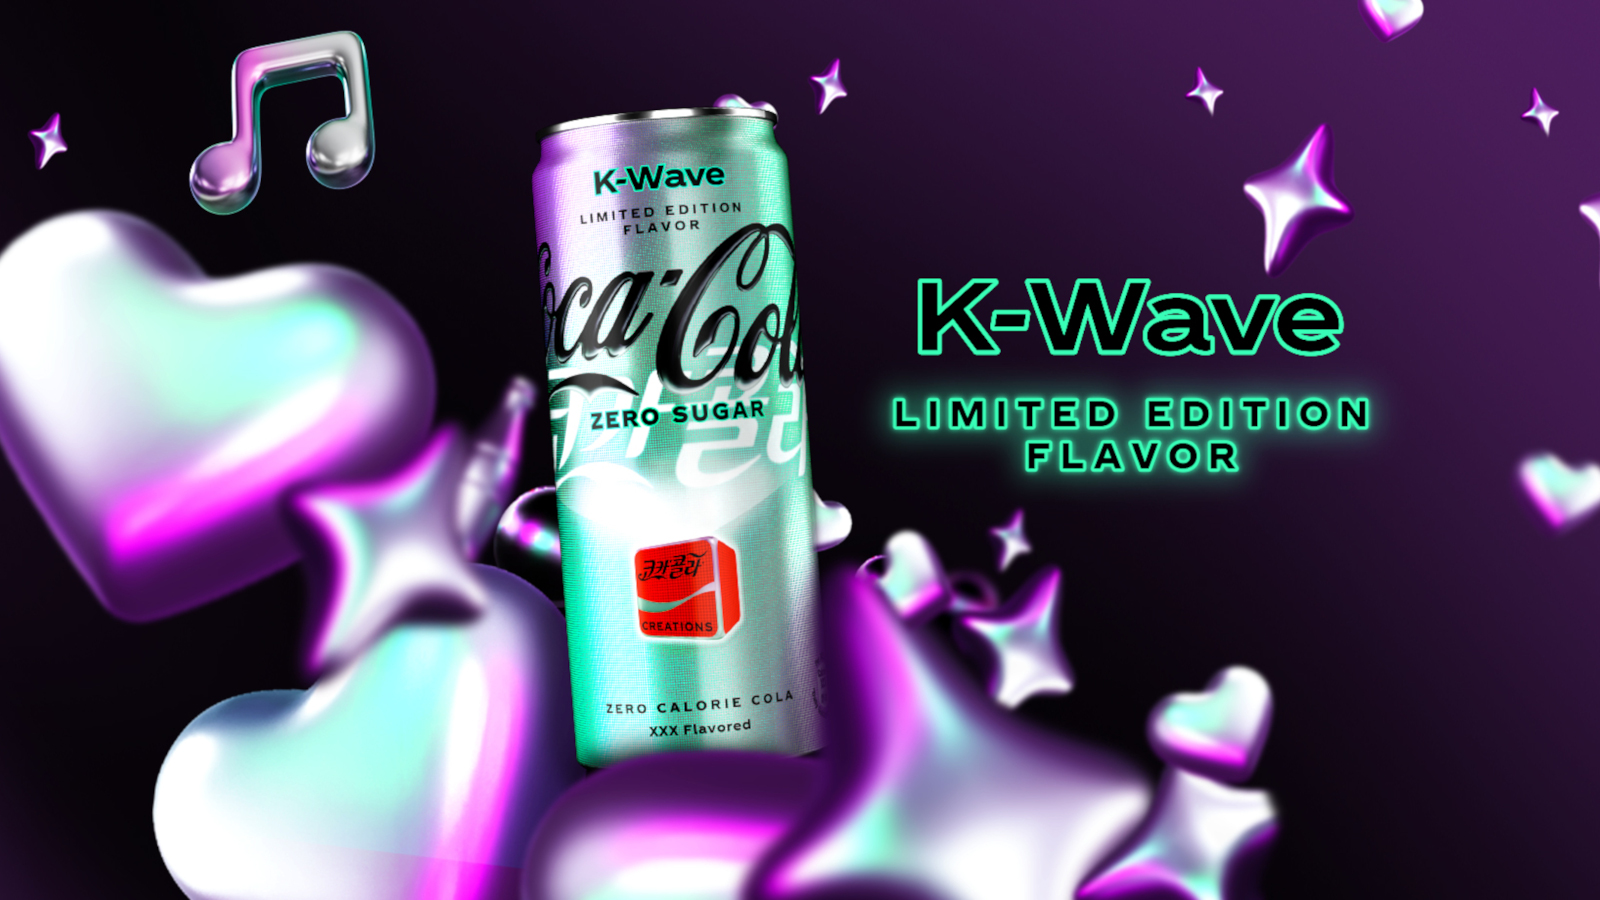 K-Wave creations